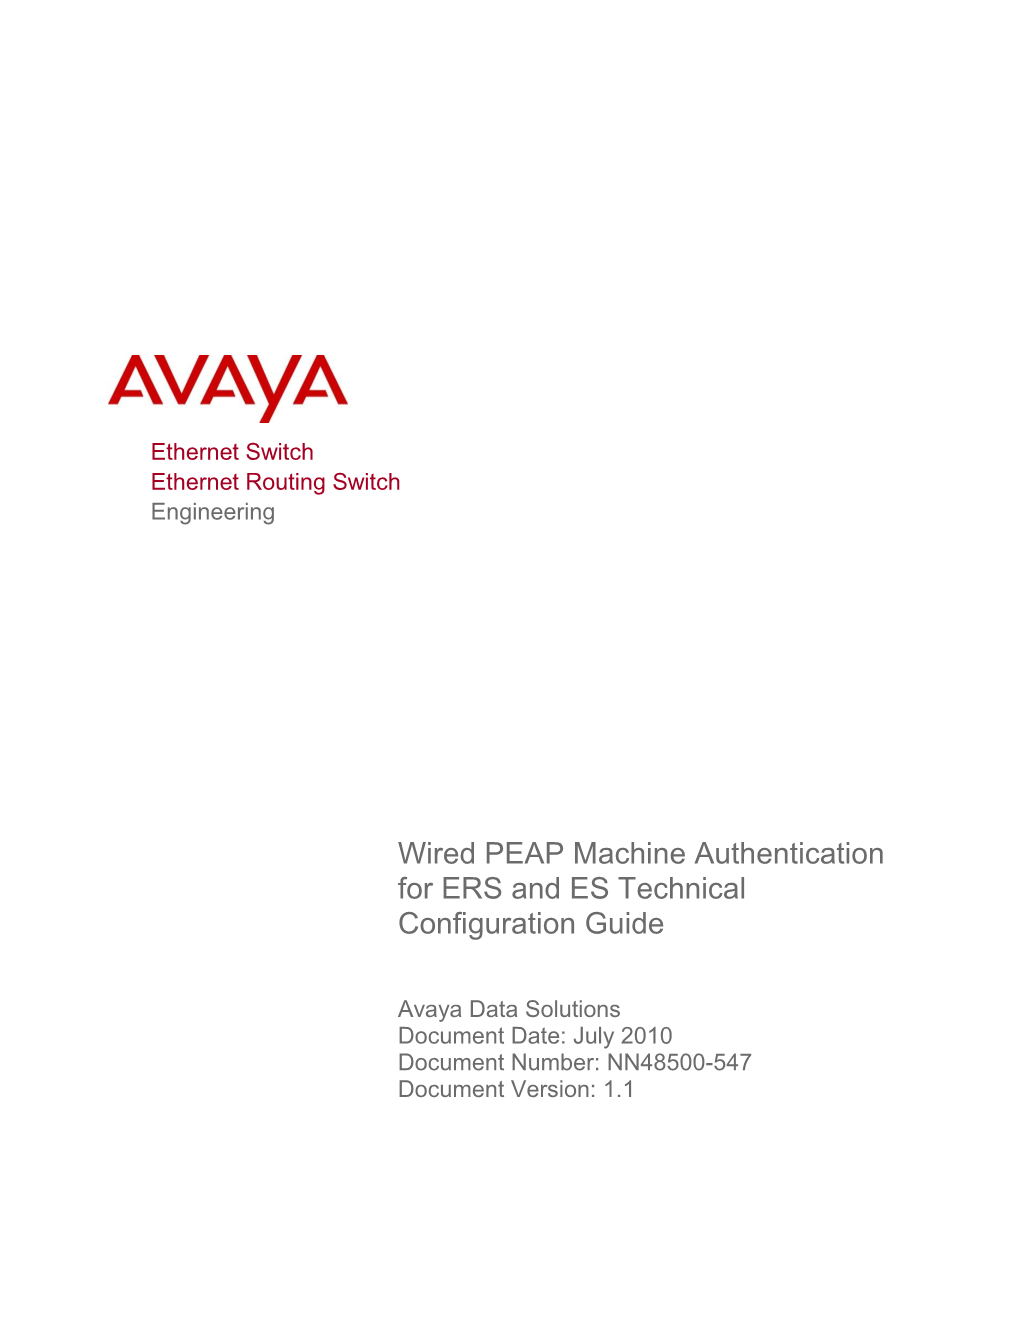 Wired PEAP Machine Authentication for ERS and ES Technical Configuration Guide